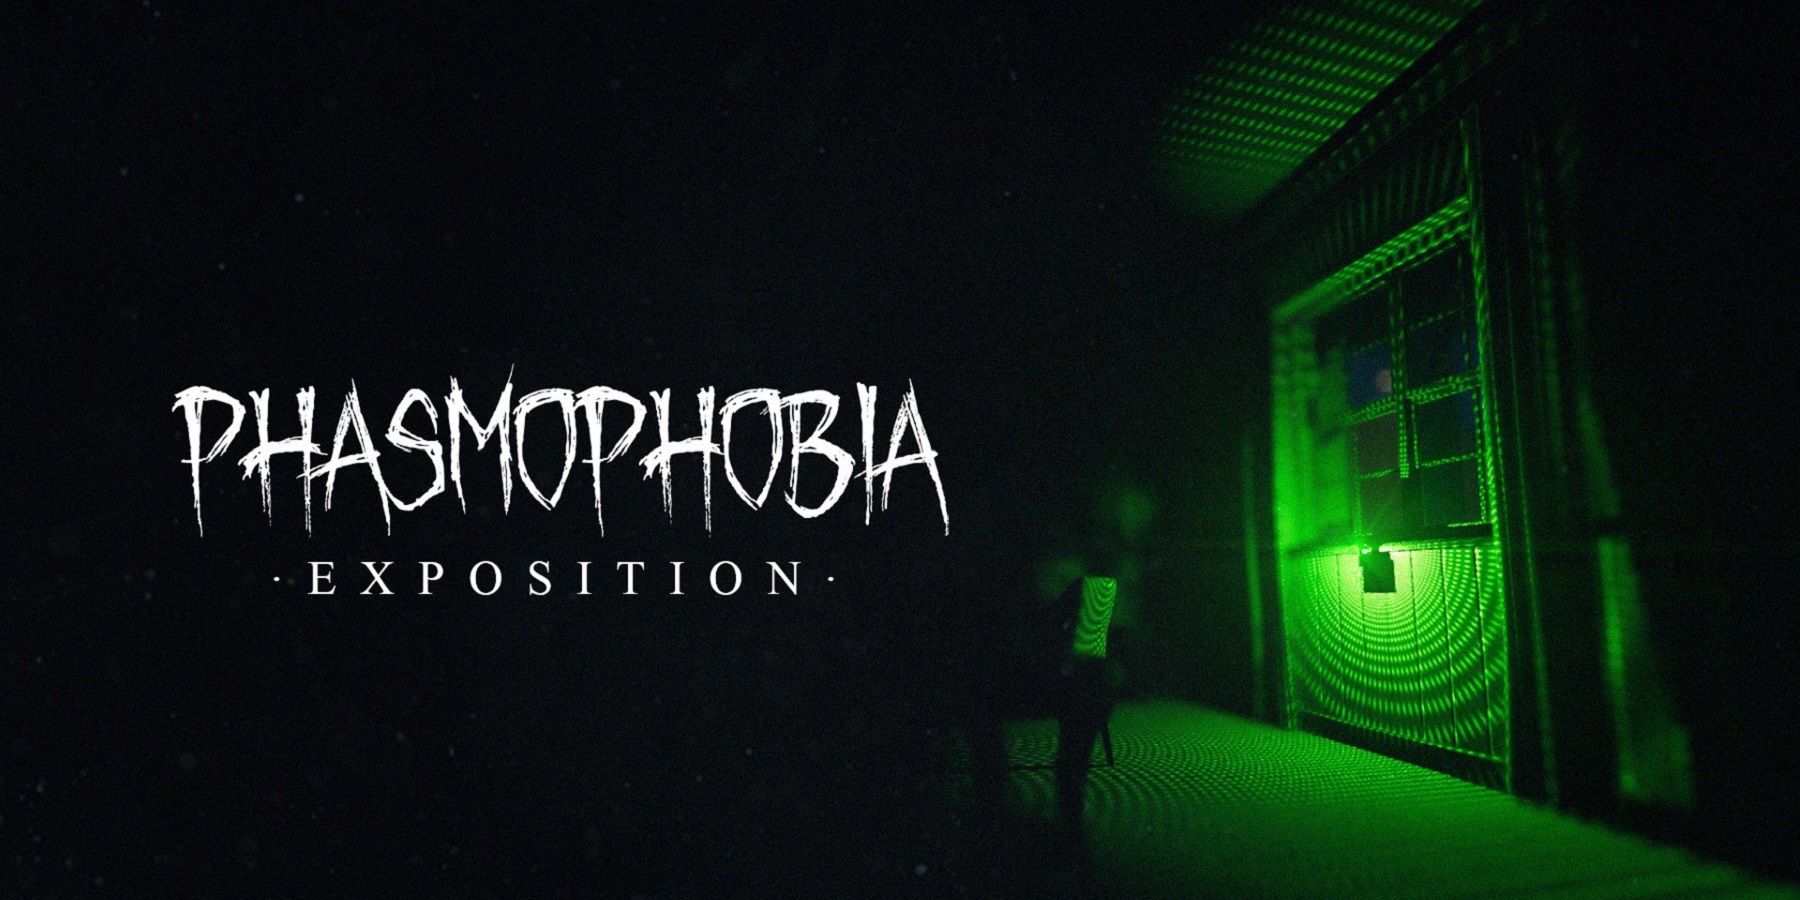 Image showing the Phasmophobia "Exposition" logo in a dark room with neon green lighting.